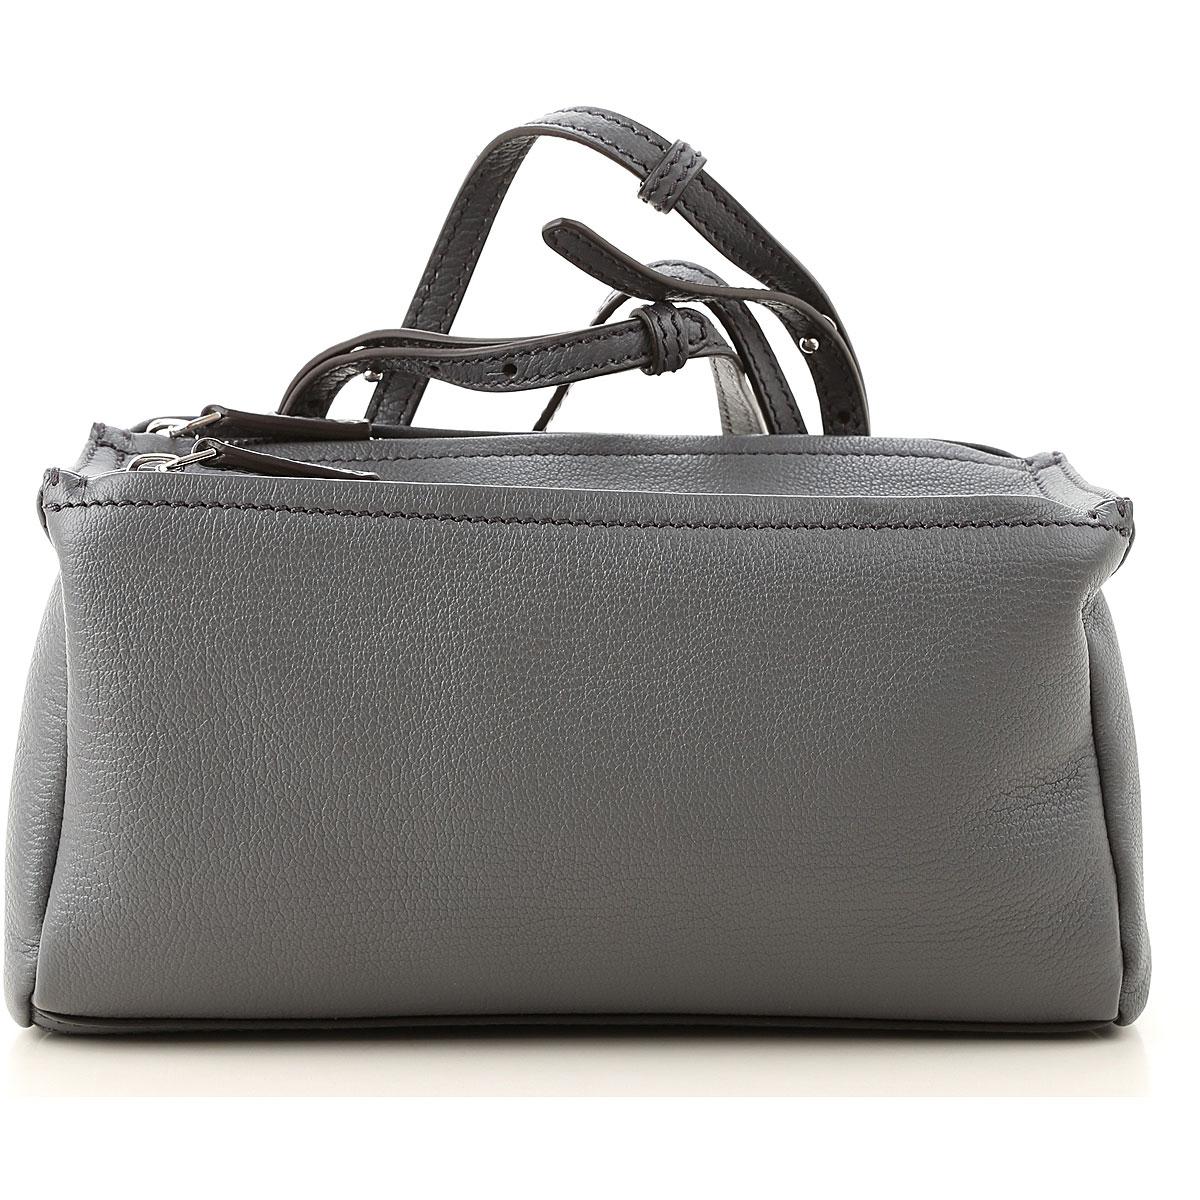 Givenchy Leather Shoulder Bag For Women On Sale in Gray - Lyst